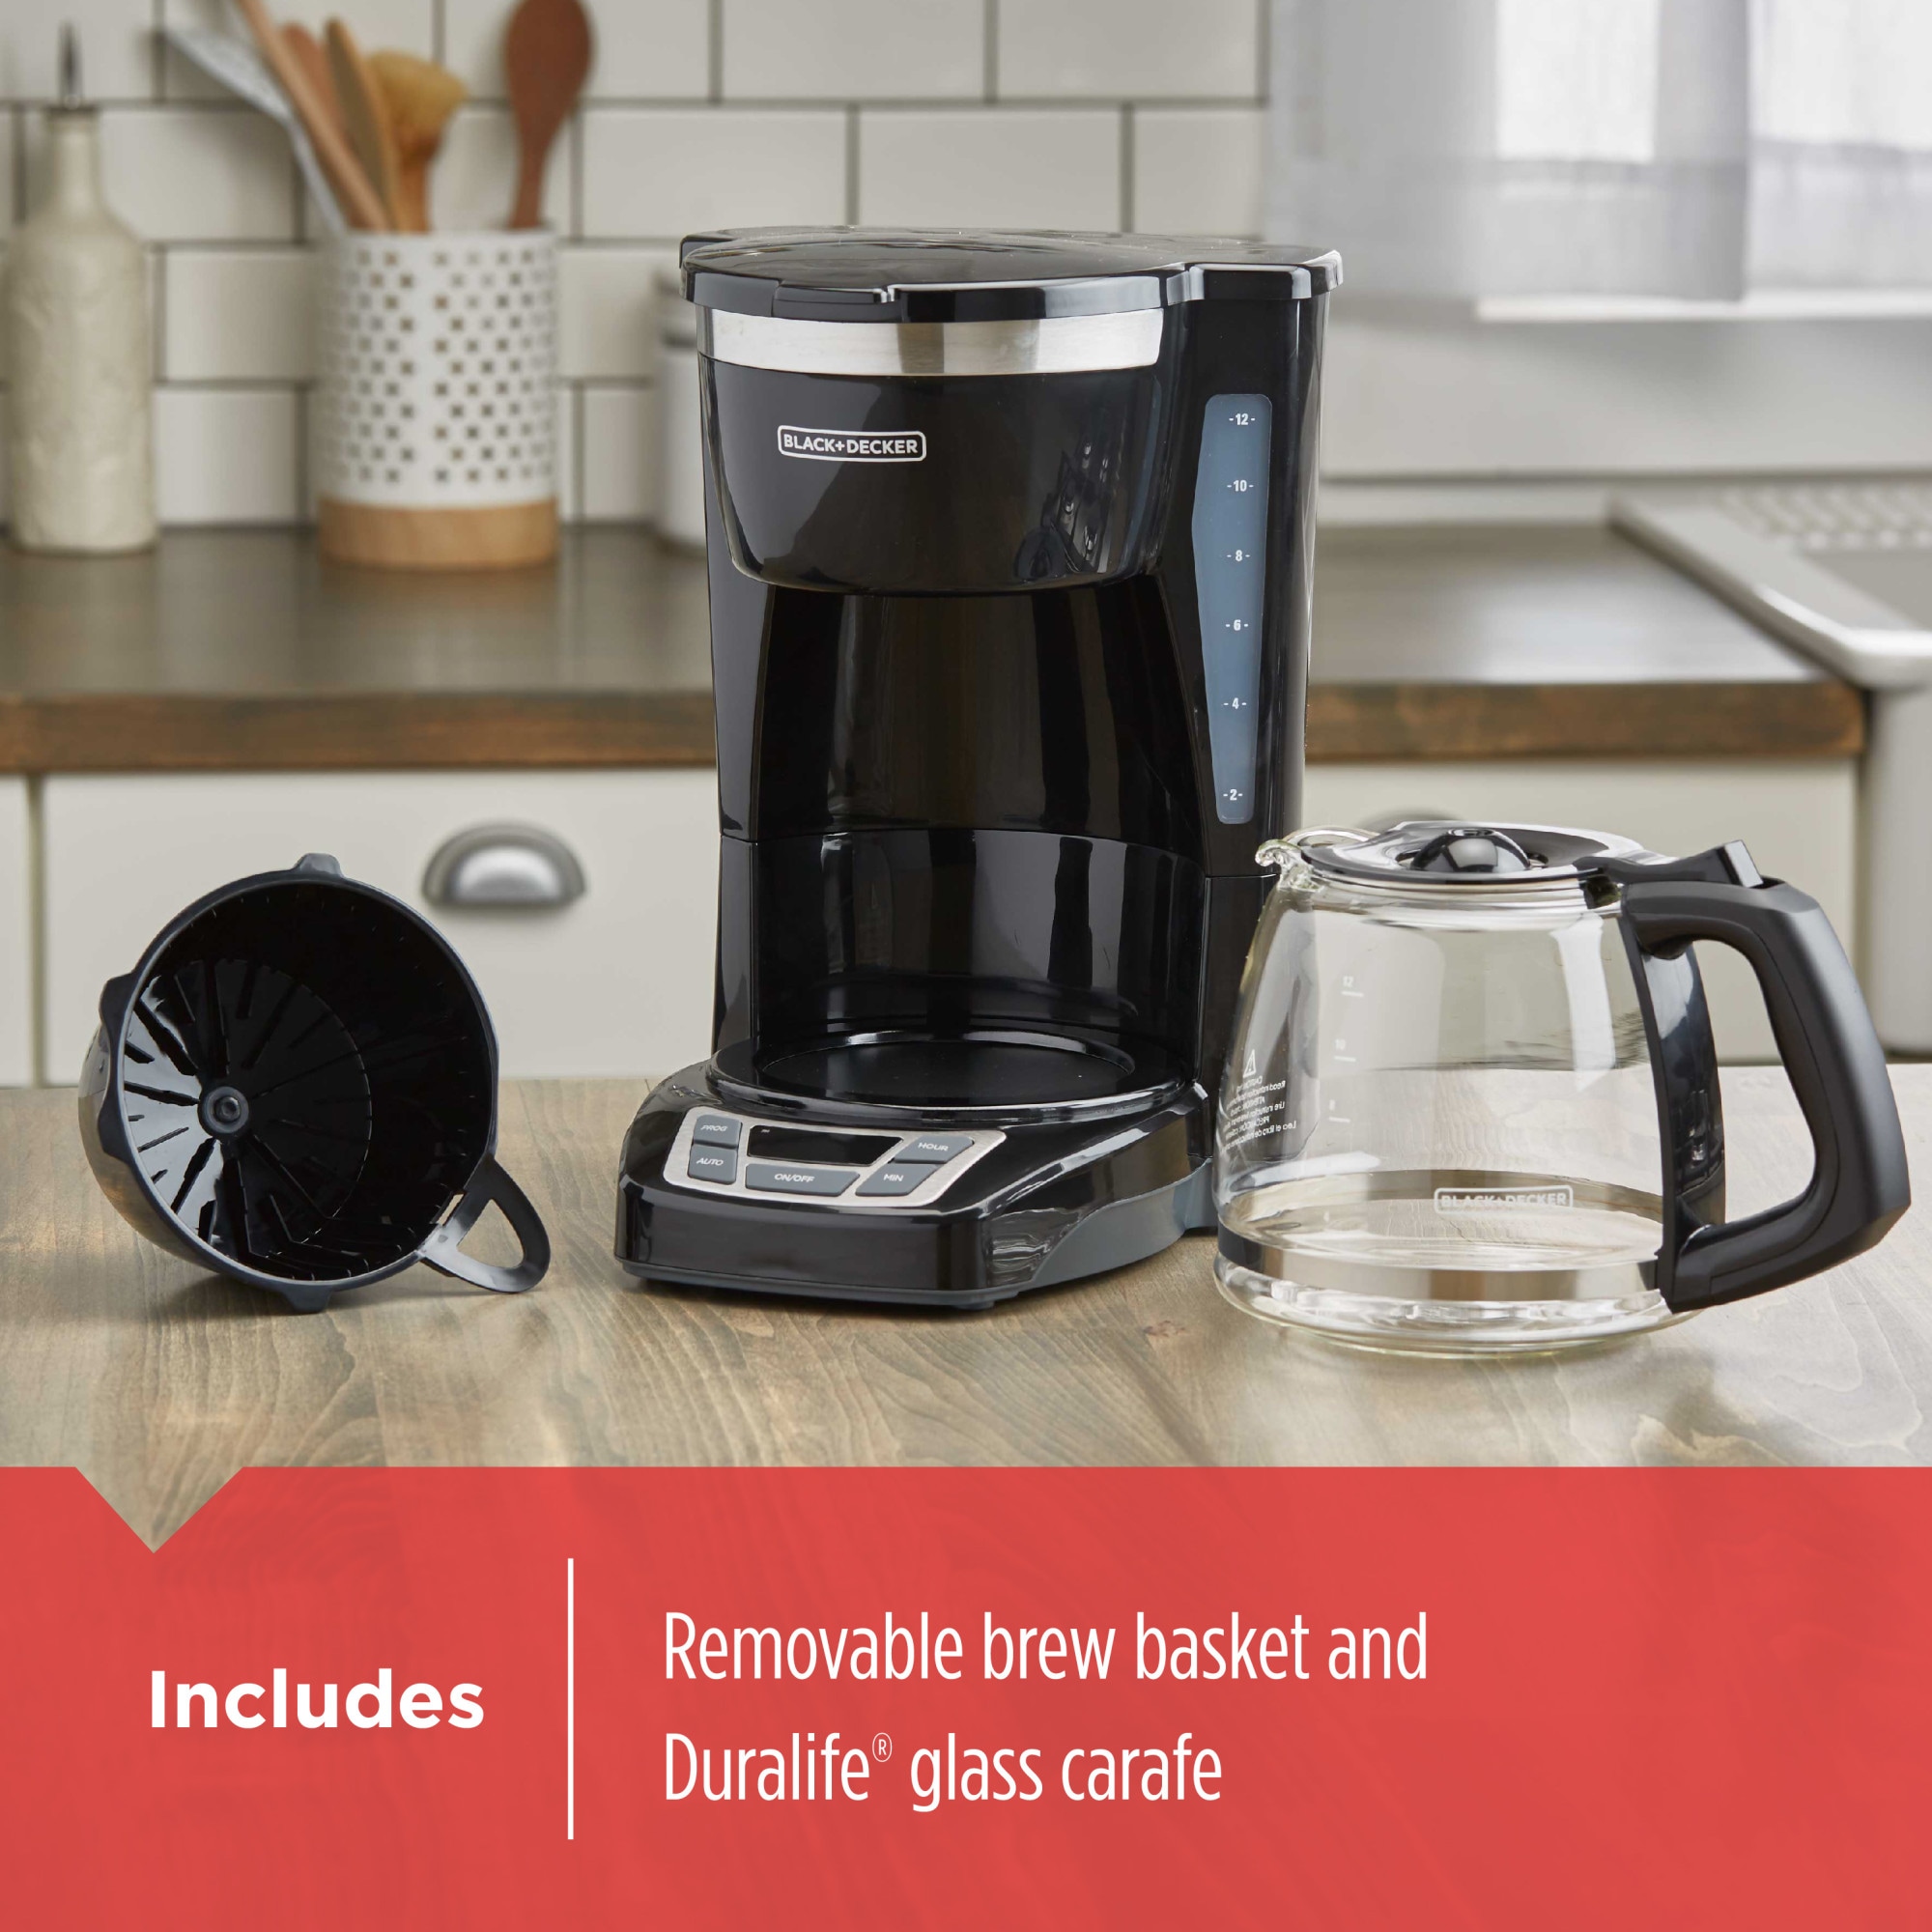 BLACK+DECKER 12-Cup Programmable Drip Coffee Maker in Black 985118634M -  The Home Depot